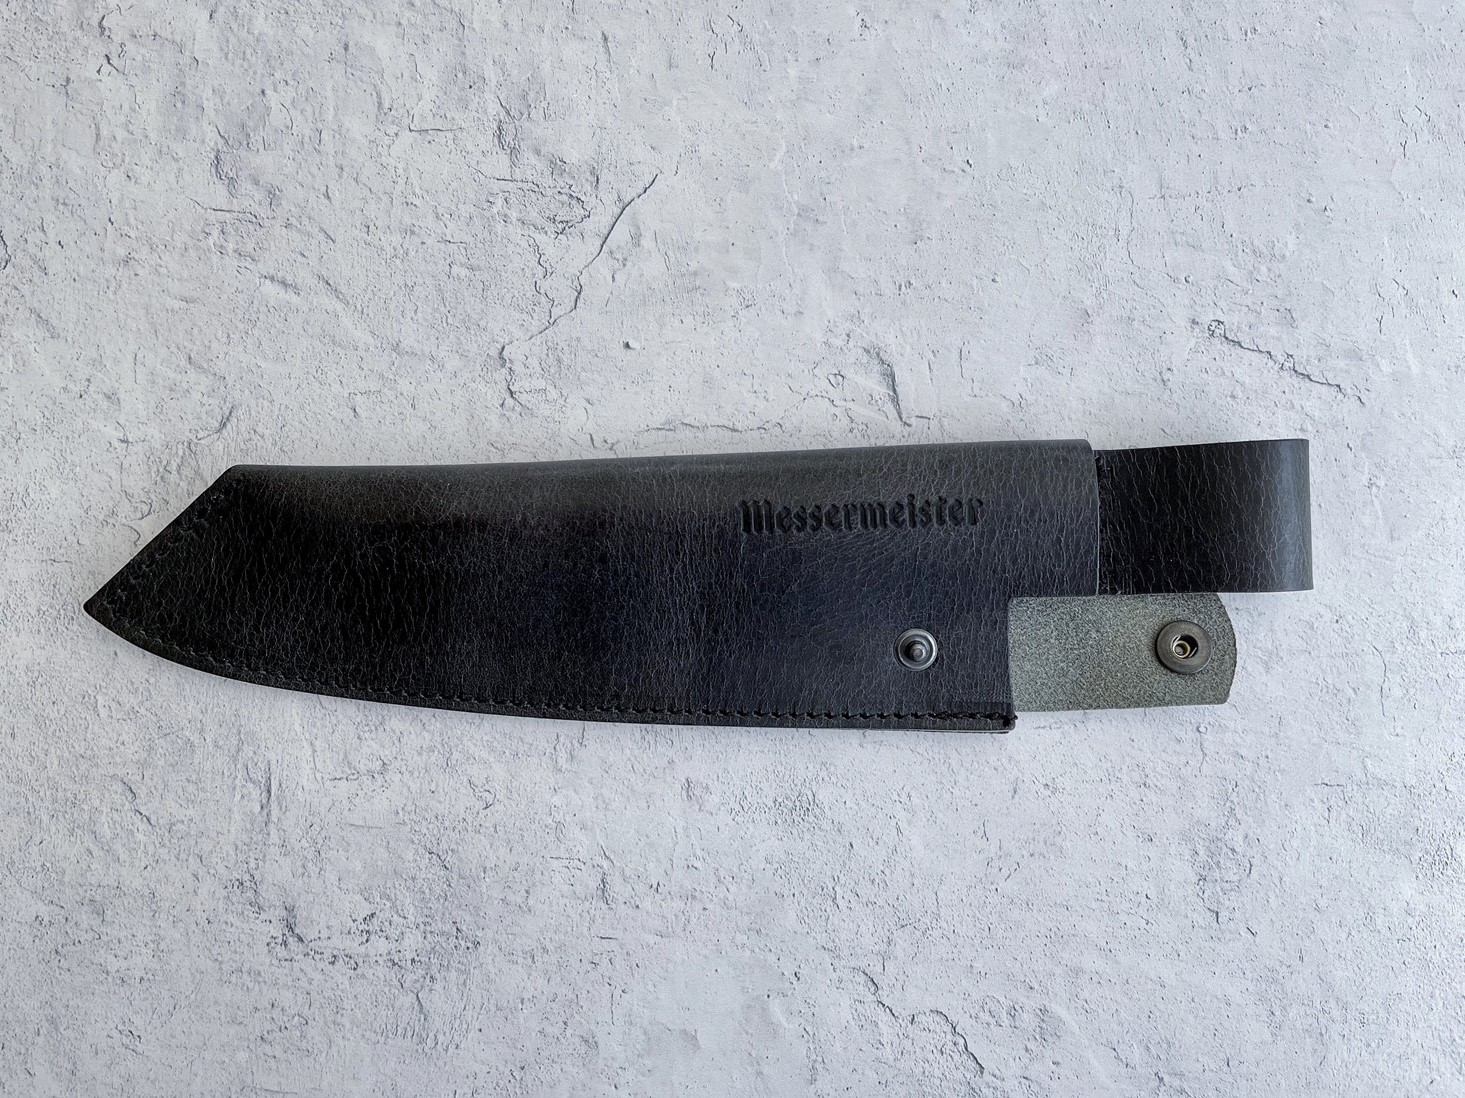 https://www.messermeister-europe.com/resize/etui-en-cuir-overland-pour-couteau-de-chef-21_5070013195783.jpg/0/1100/True/overland-leather-sheath-for-chef-apos-s-knife.jpg